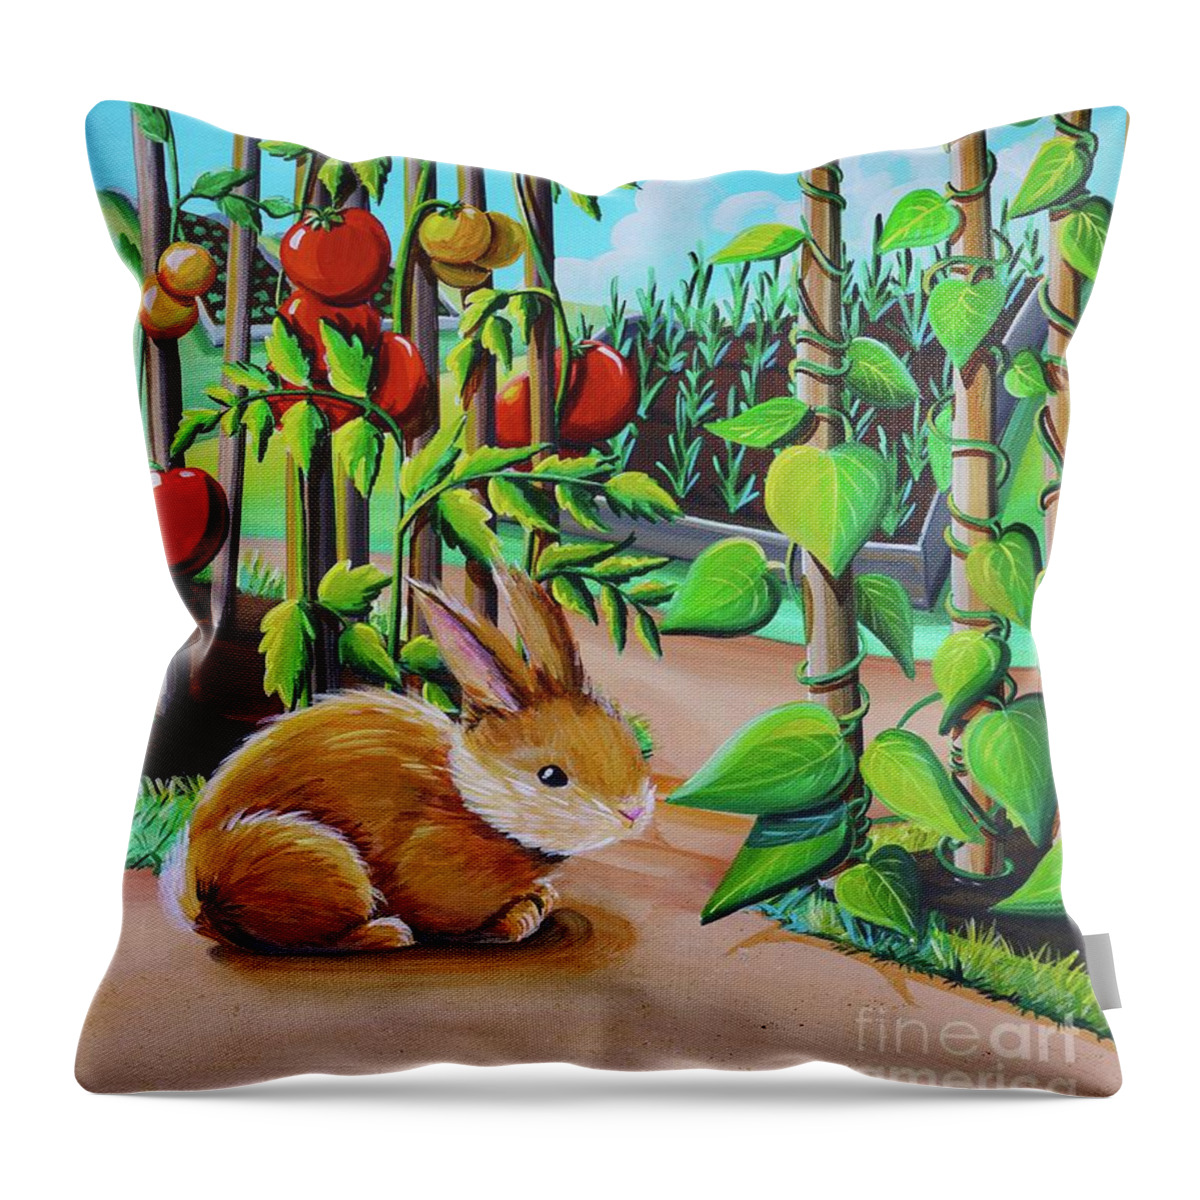 Peter Rabbit Throw Pillow featuring the painting Peter In The Garden by Cindy Thornton